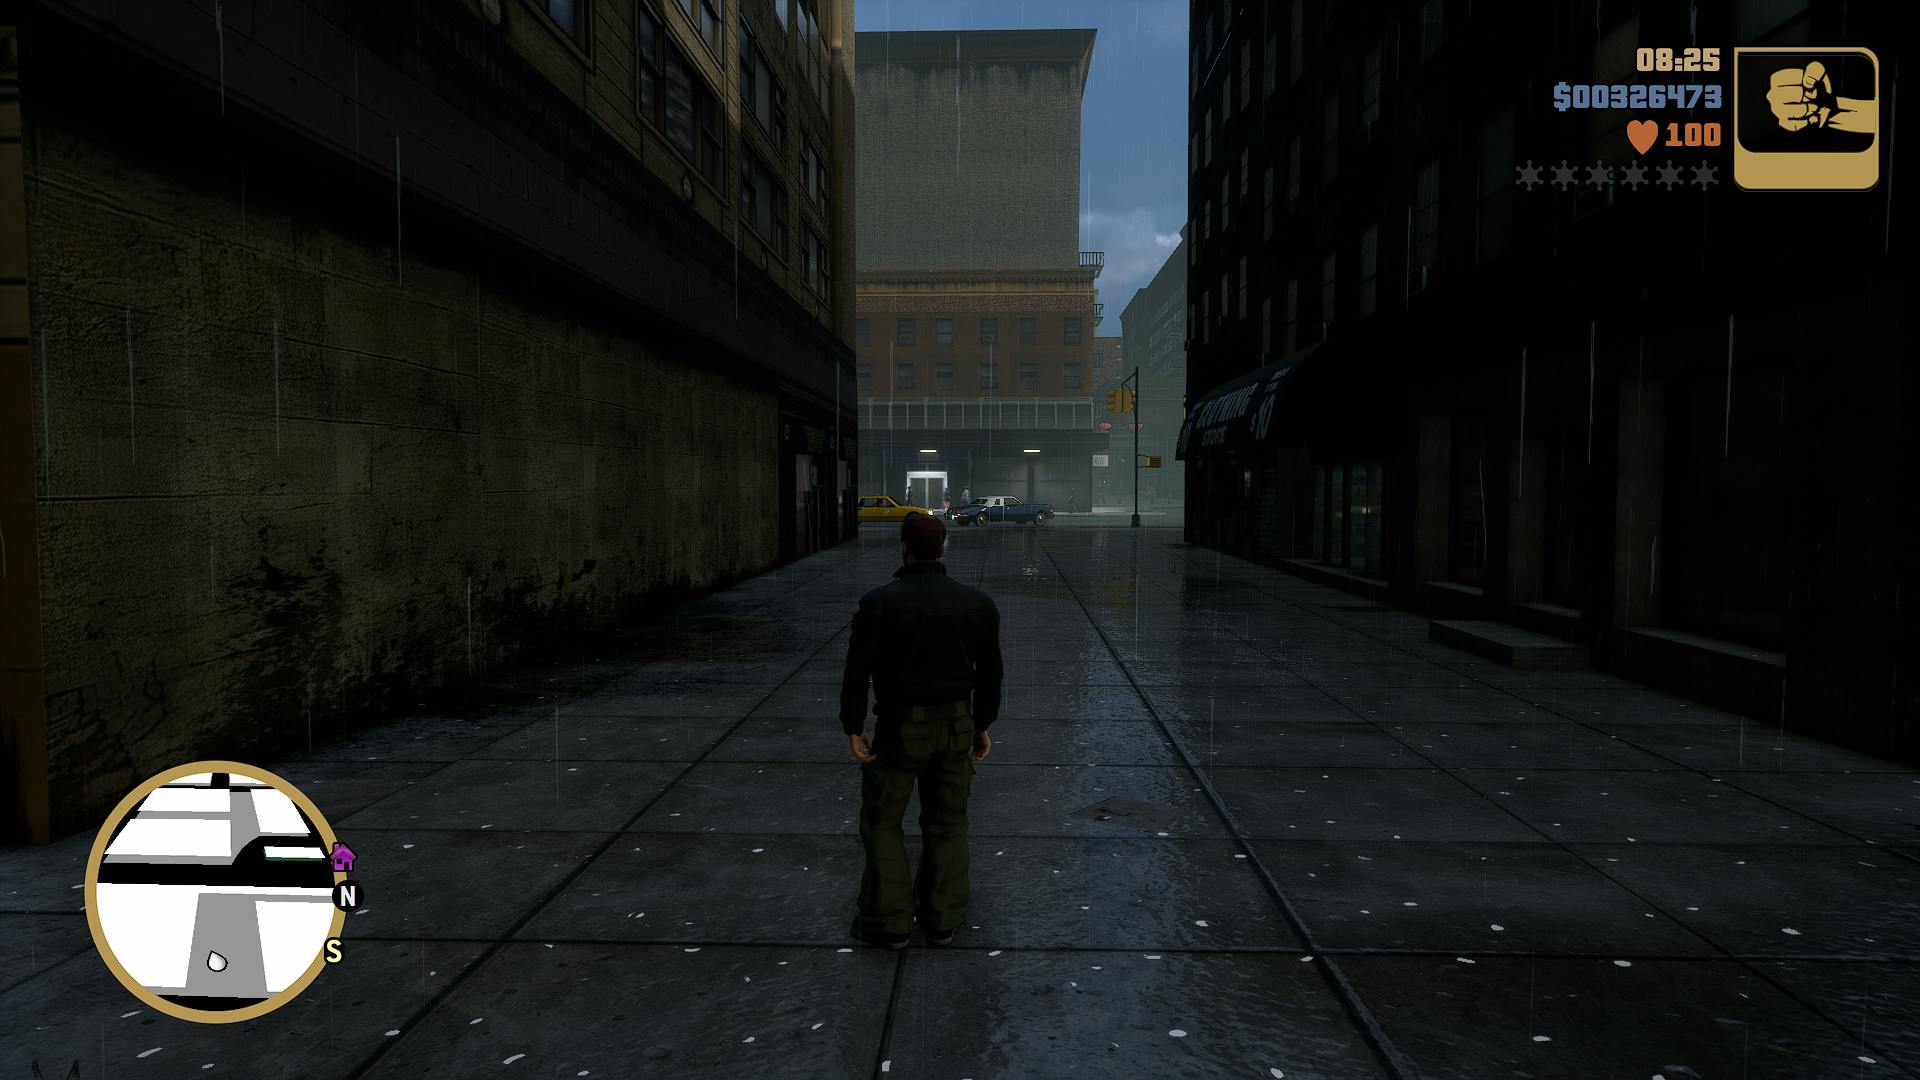 This mod restores Grand Theft Auto IV's multiplayer experience